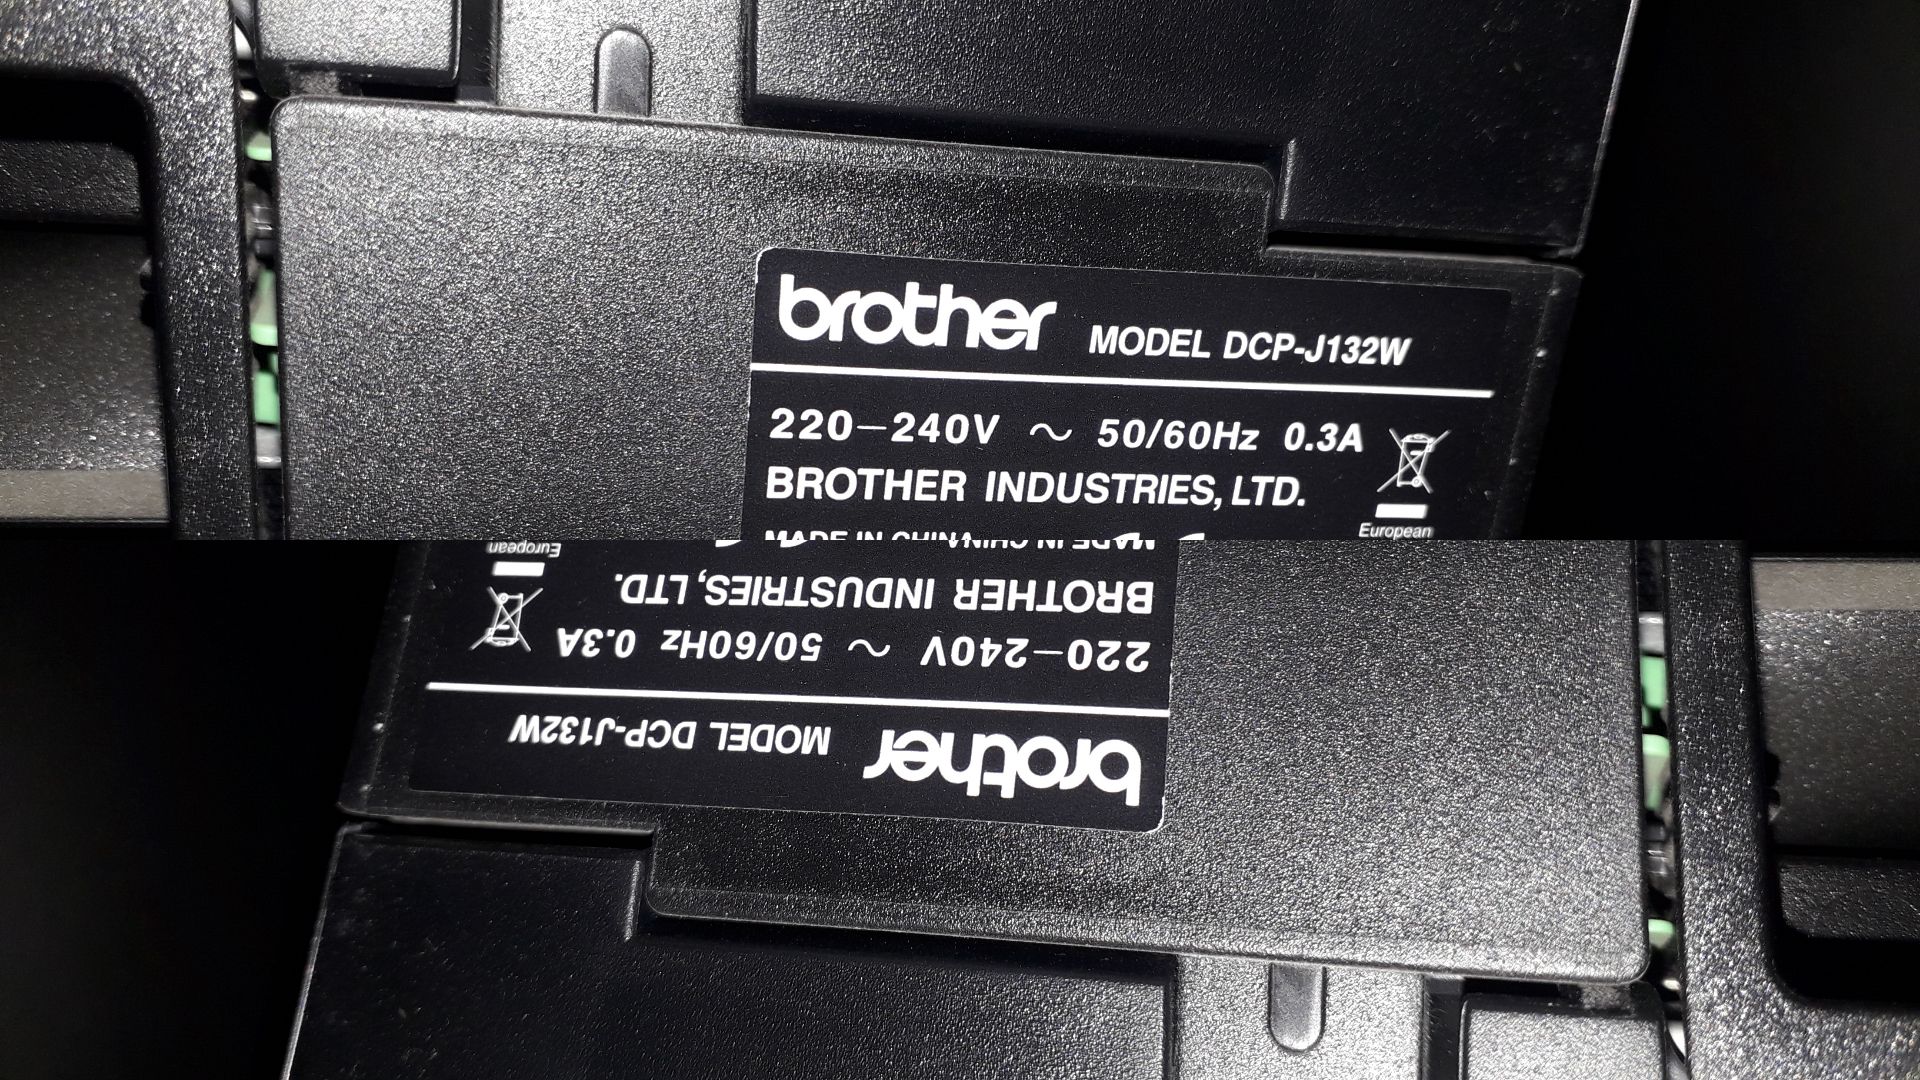 Brother DCP-J132W Printer - Image 2 of 2